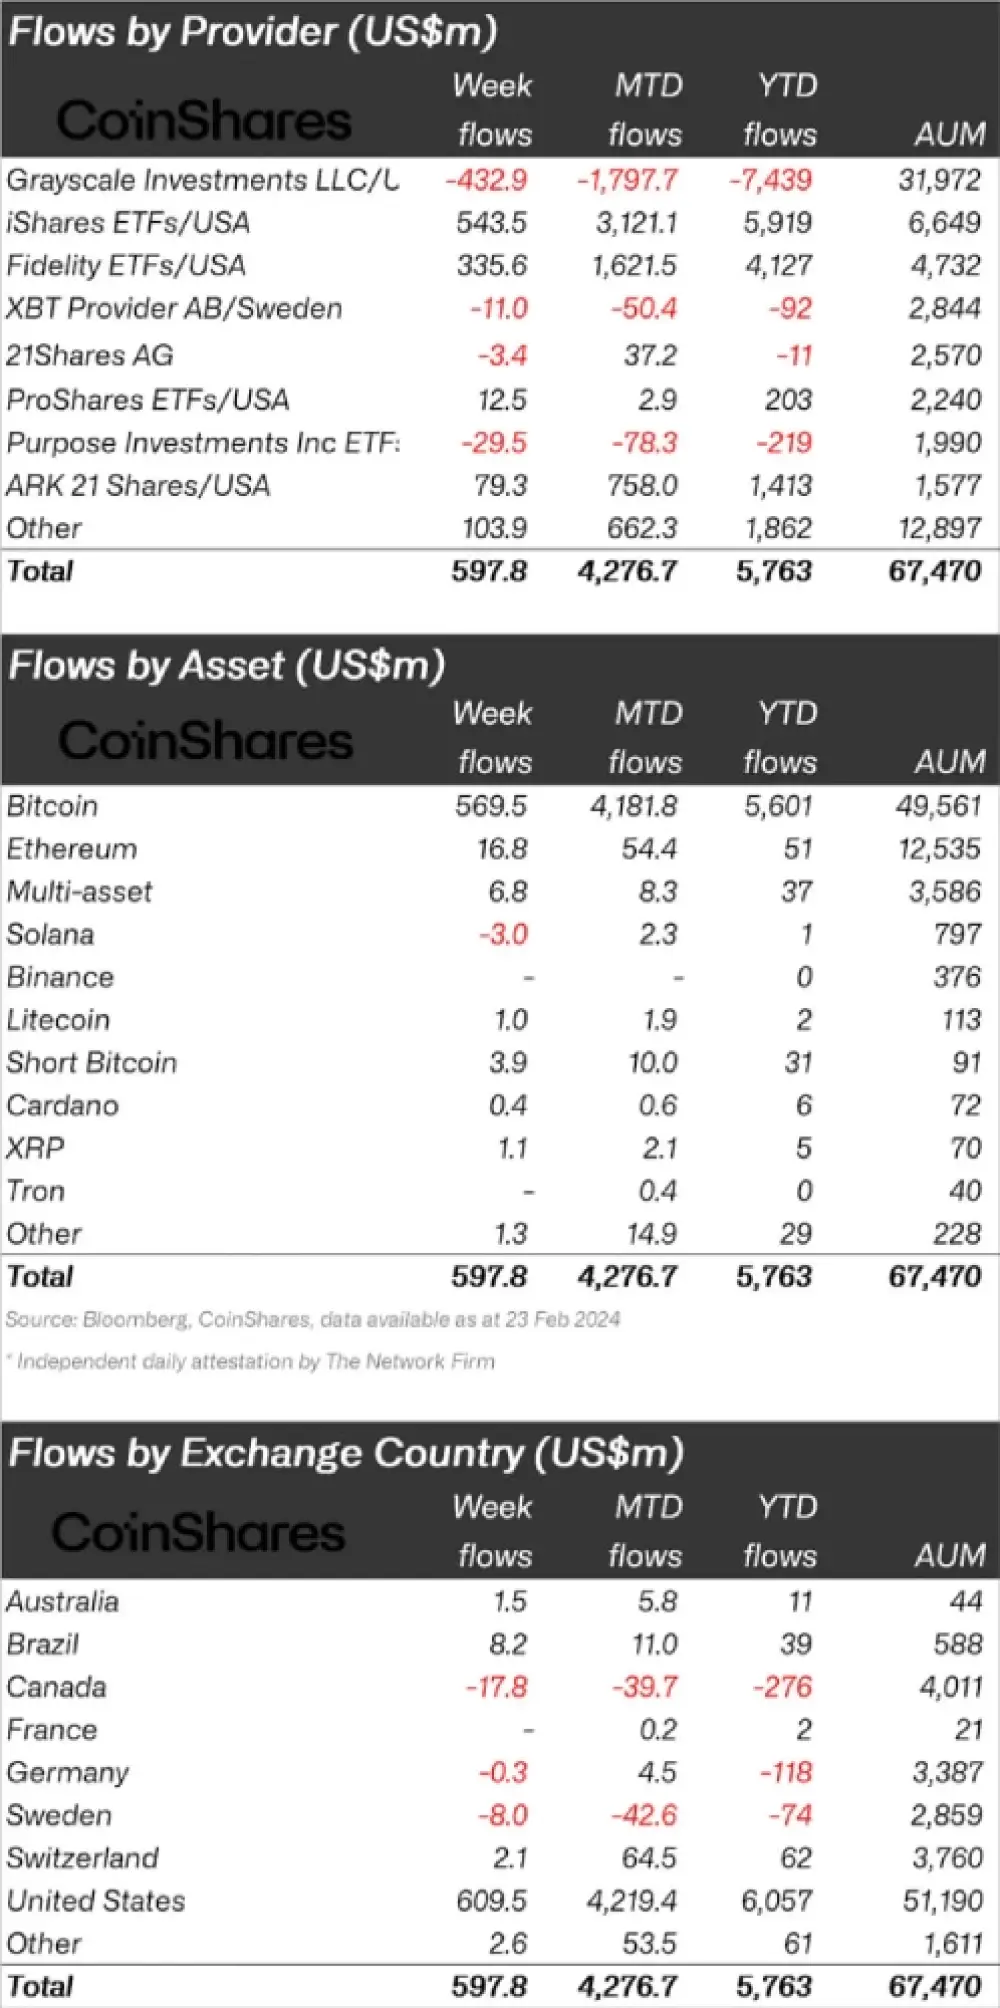 Coinshares (weekly report on financial flows in crypto products (26/02/2024):